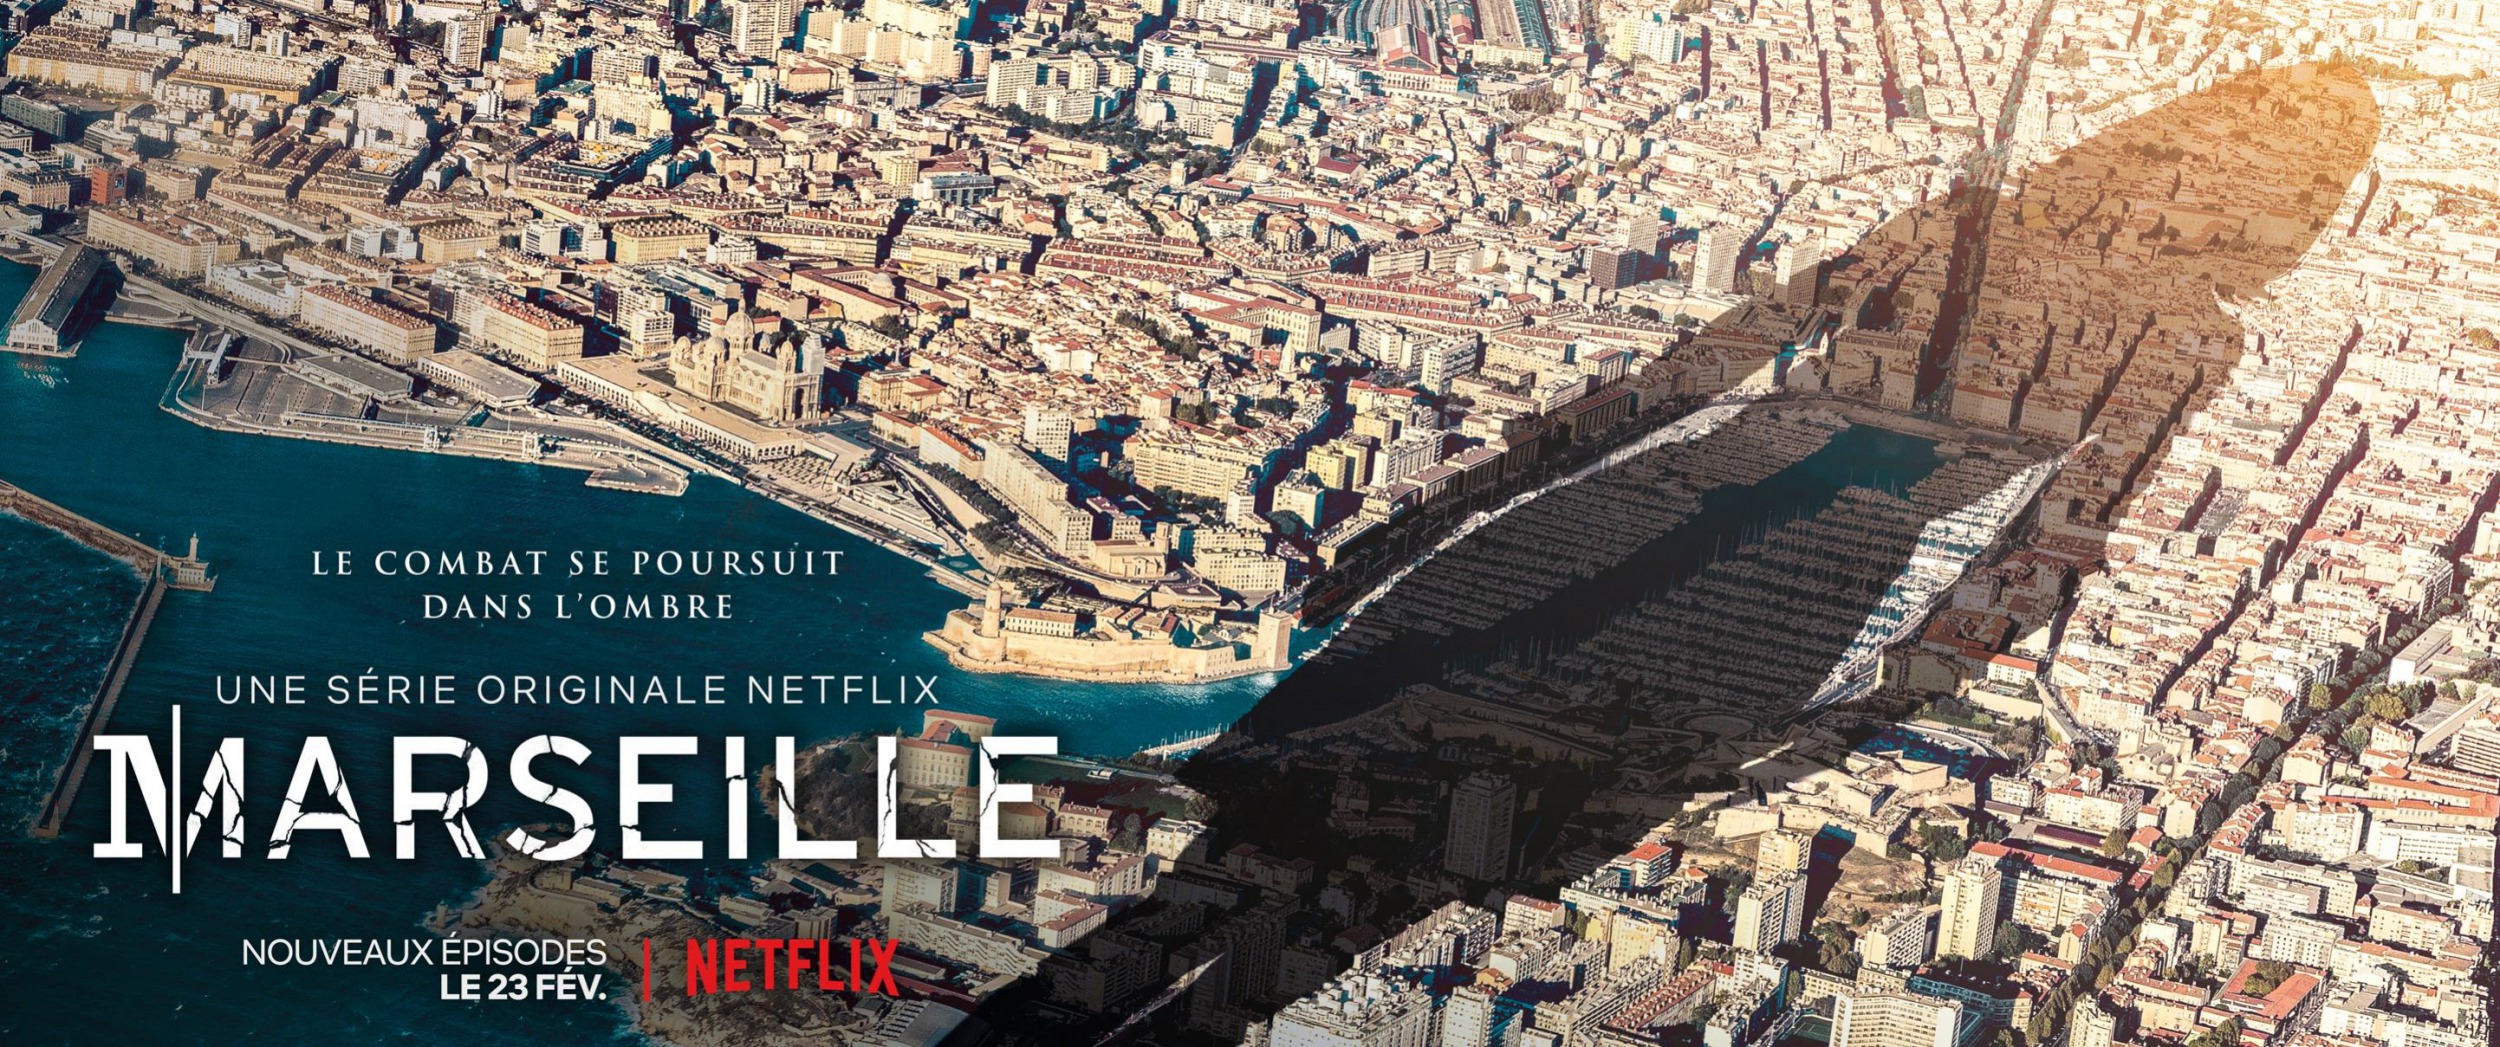 Mega Sized TV Poster Image for Marseille (#7 of 15)